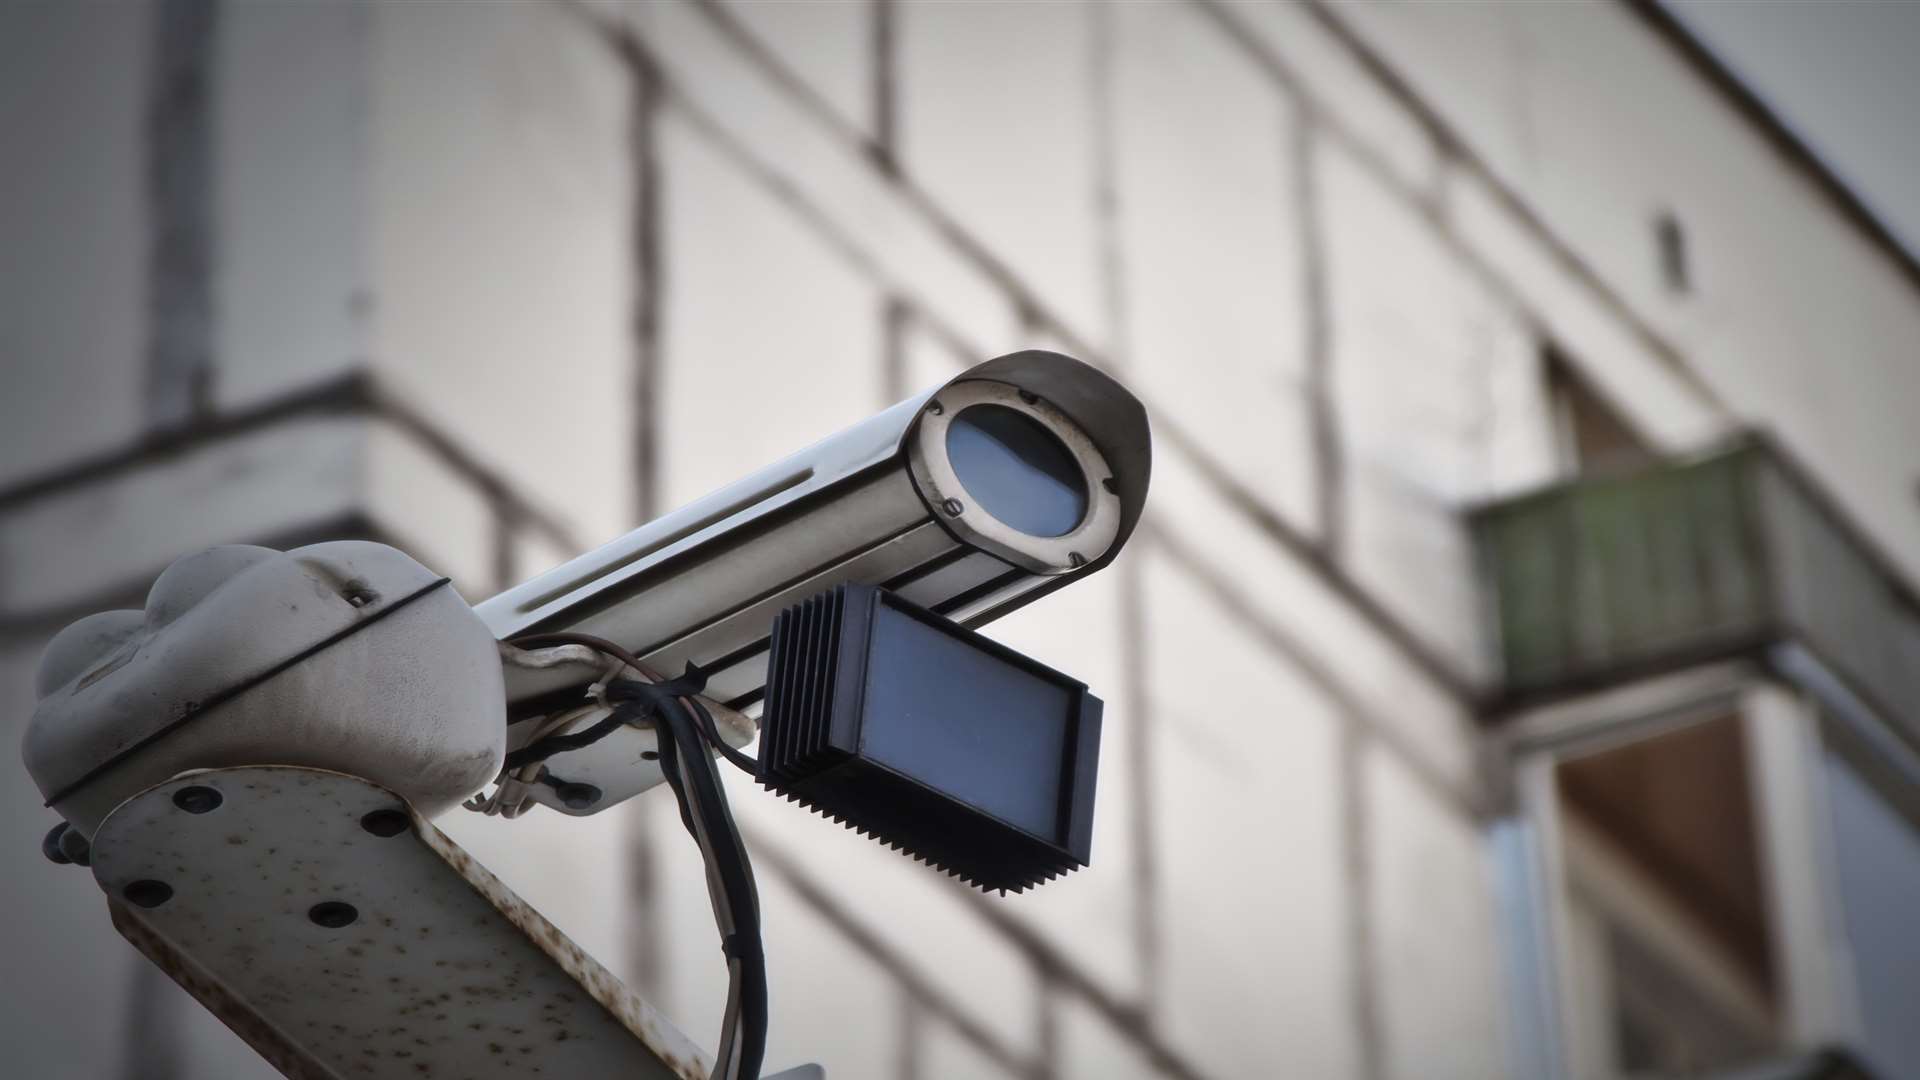 CCTV could be a thing of the past